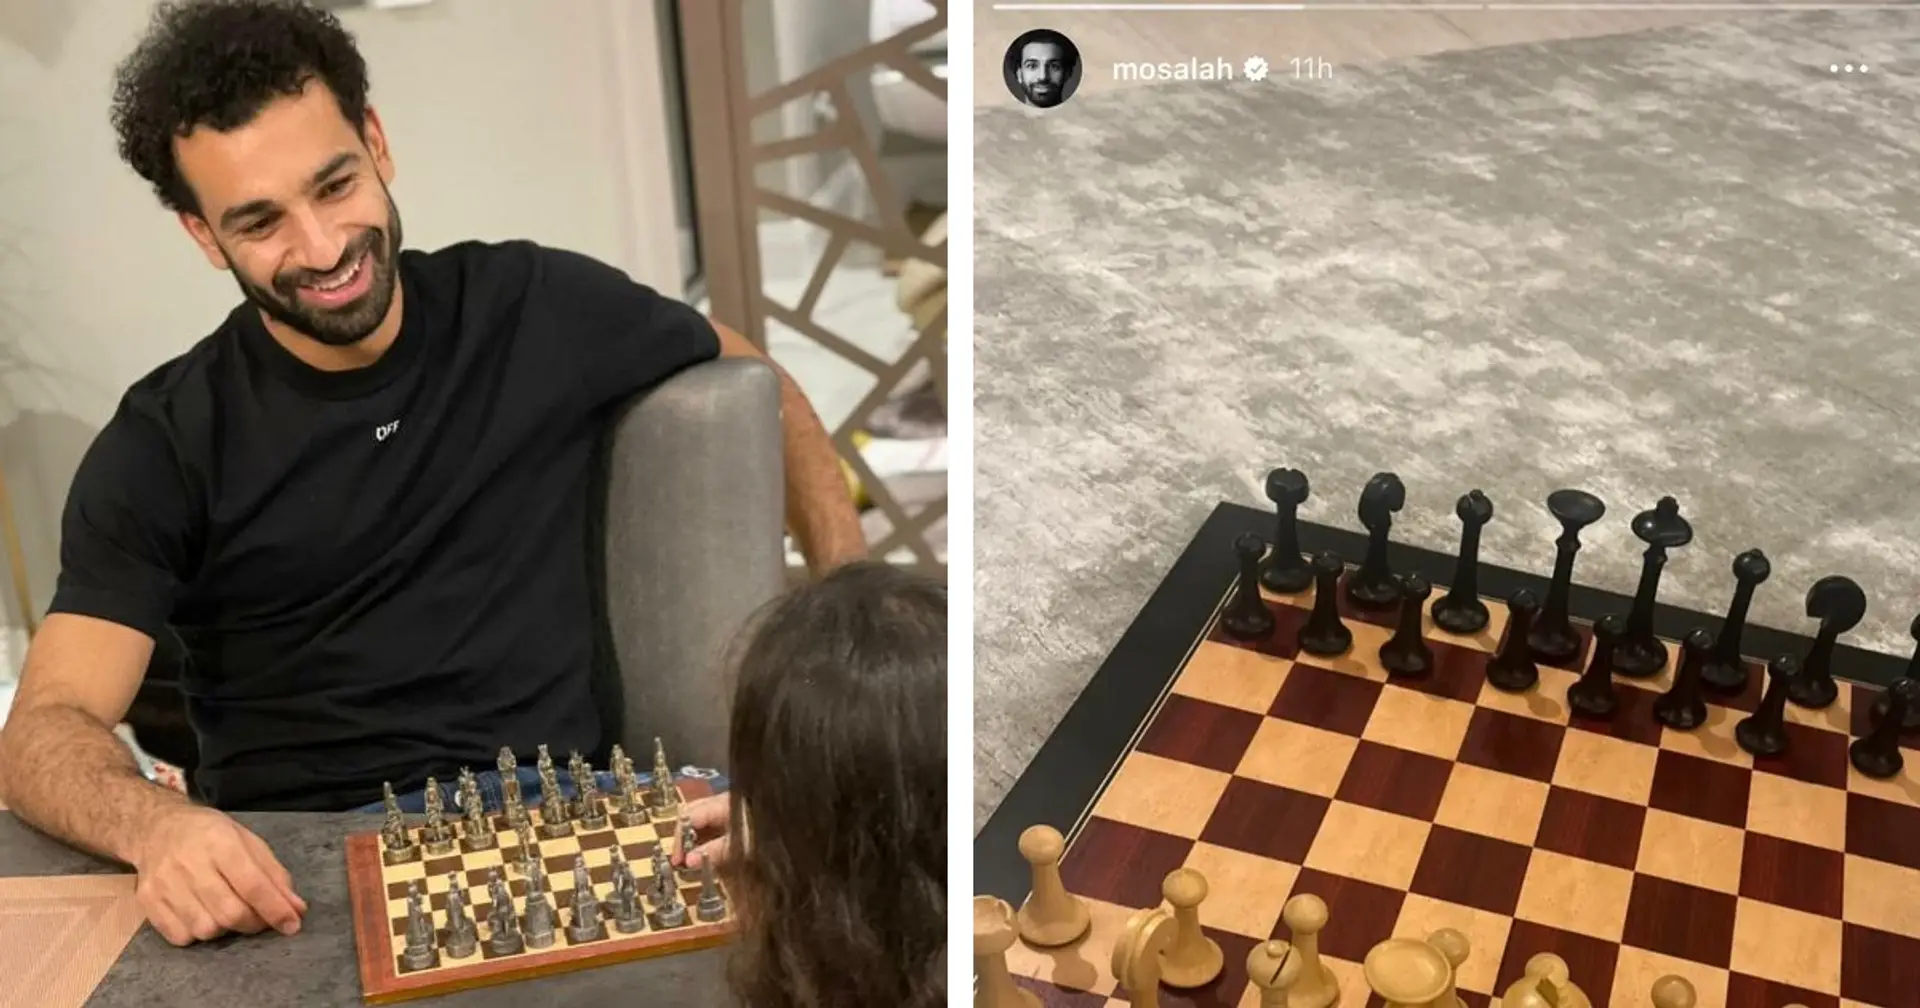 'The way I'm addicted to it is insane': Salah opens up on his love for chess – says it helps his football